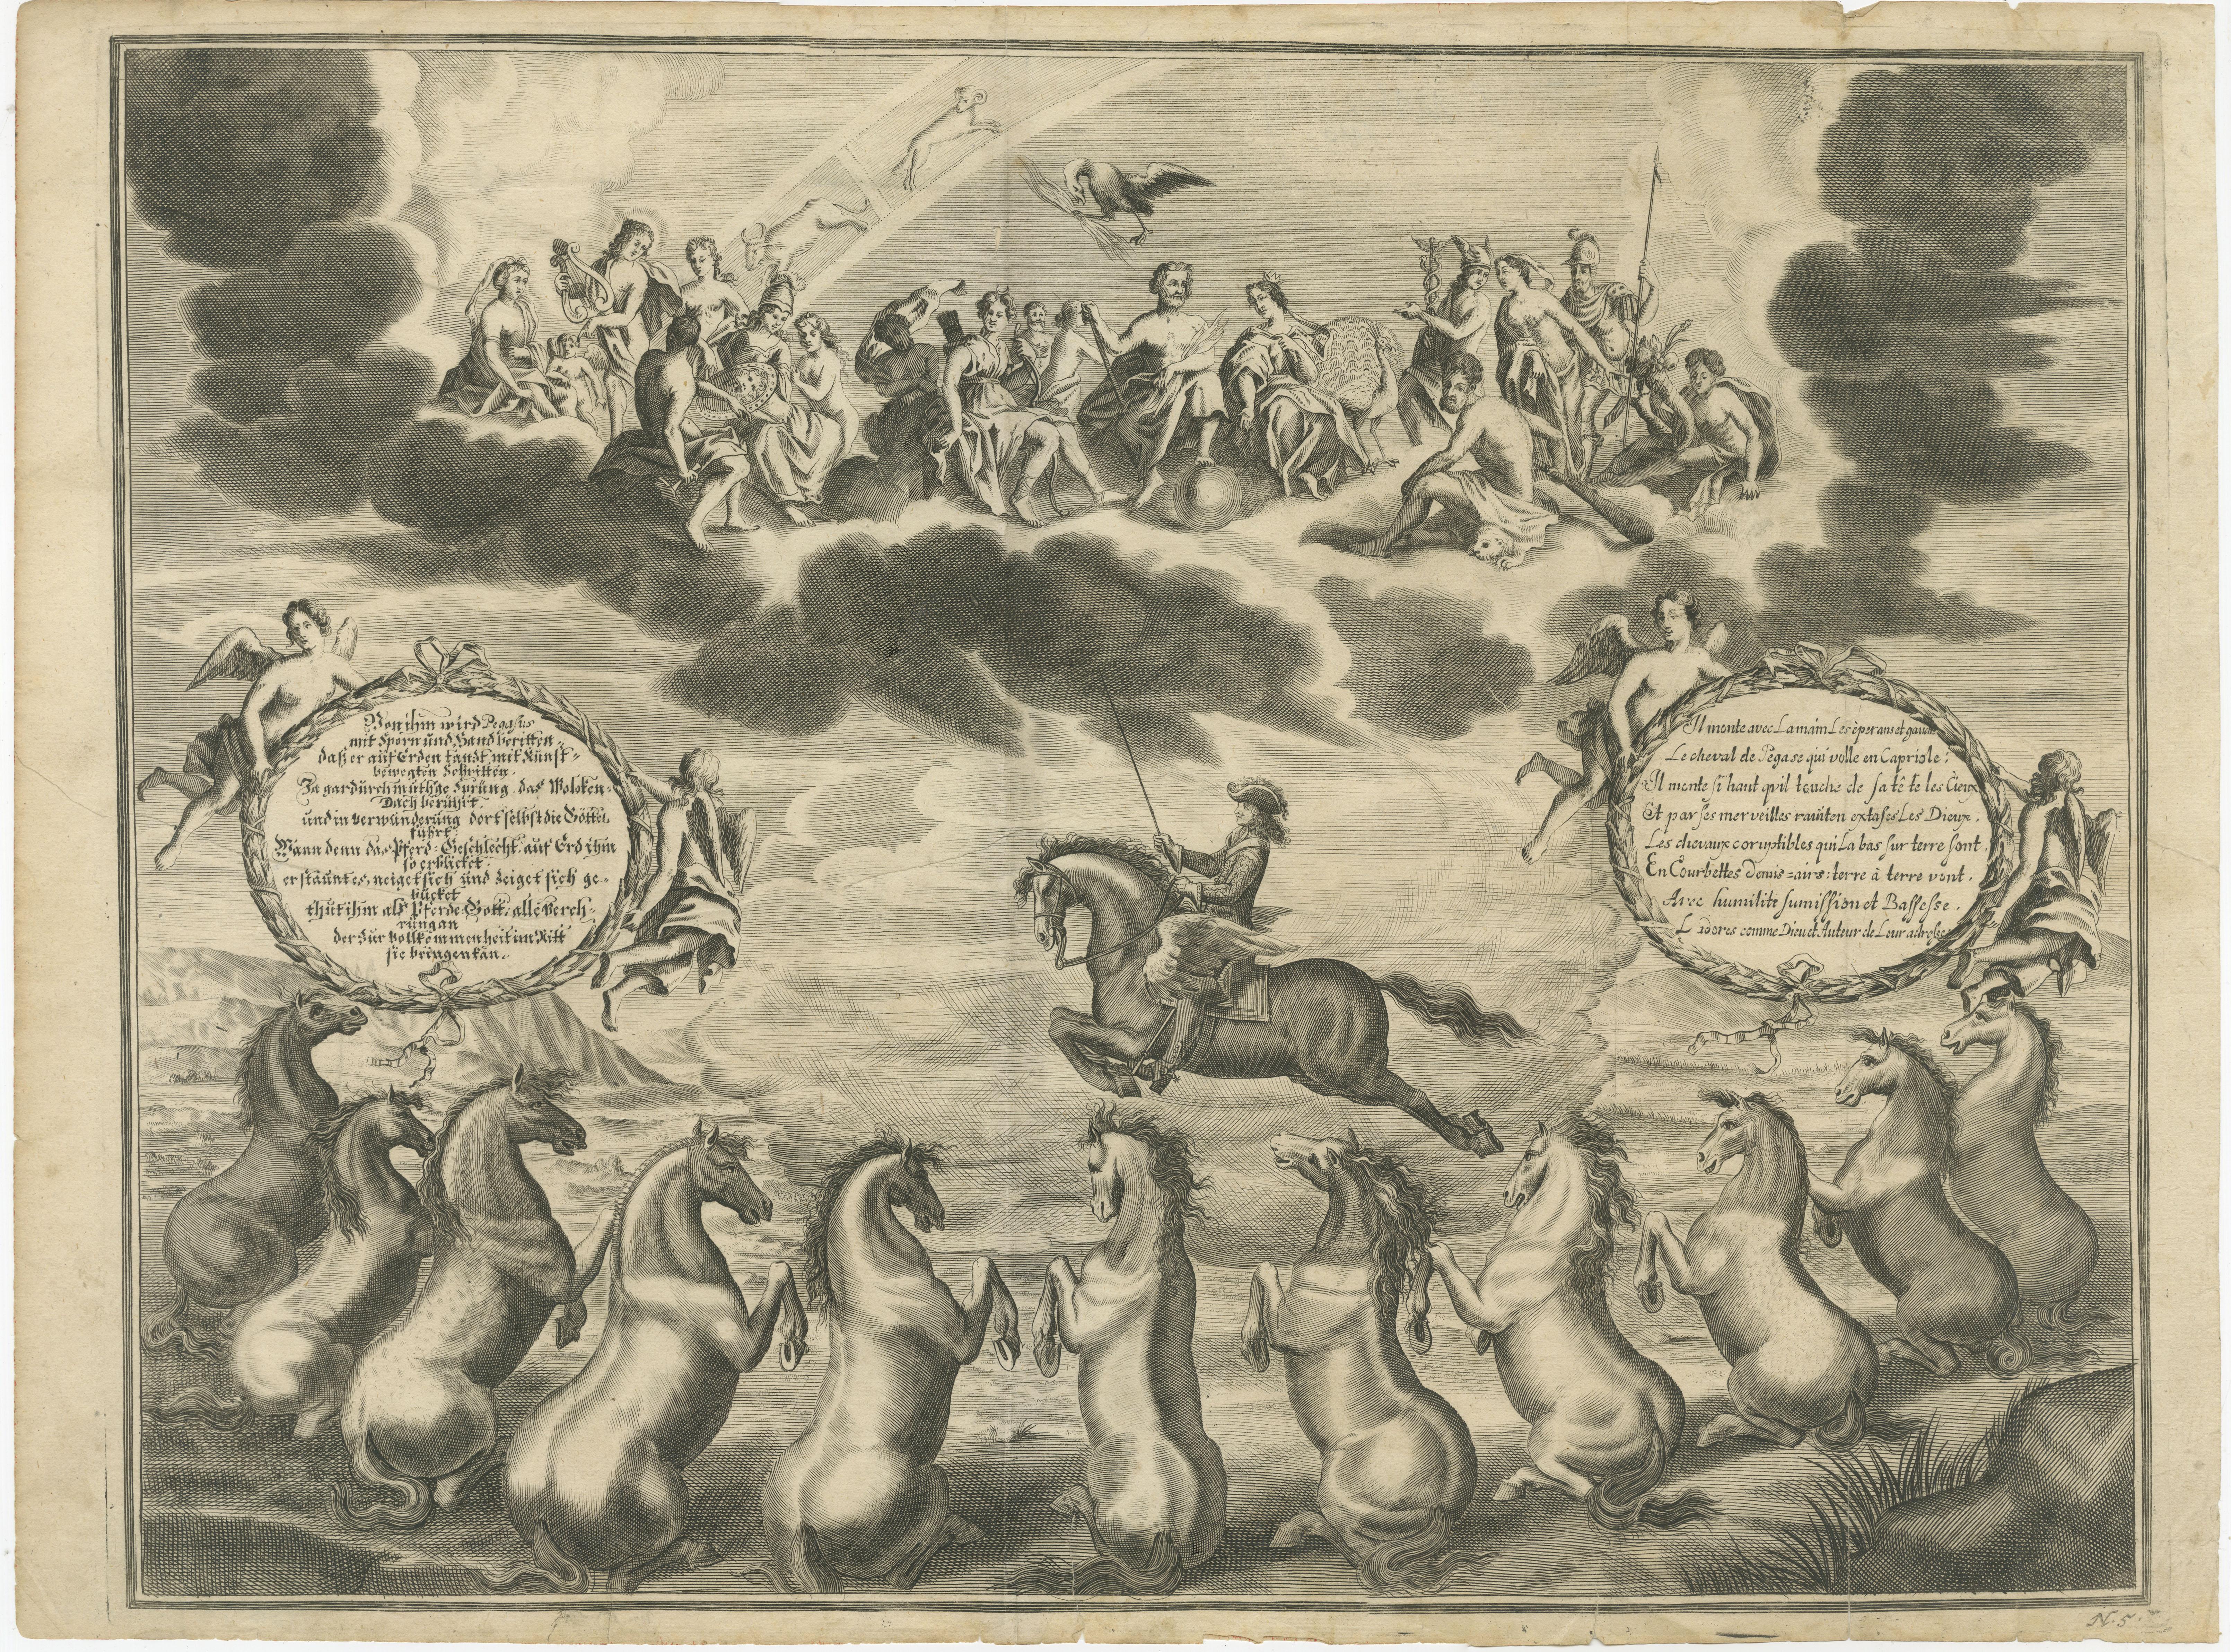 Antique print titled 'Von ihm wird Pegasus mit Sporn und Hand geritten (..)'. Original old print of the Marquess of Newcastle riding on Pegasus before an assembly of the Greek Gods and receiving the salutes of earthly horses. Published circa 1750.